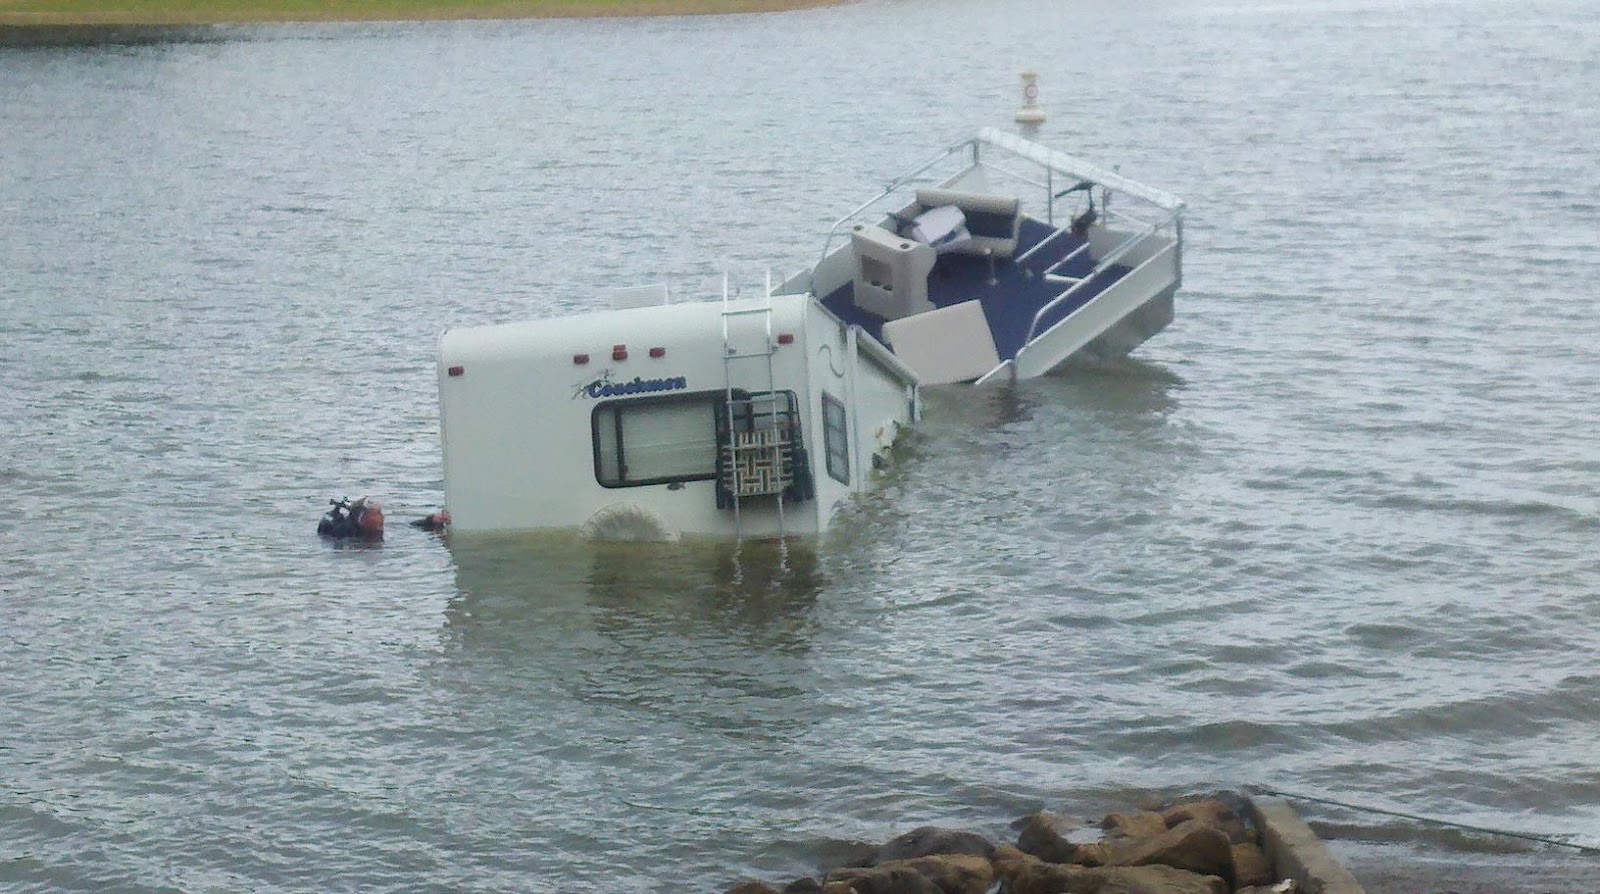 Troup County Sheriff's Office: RV Sinks at Whitetail Campground!